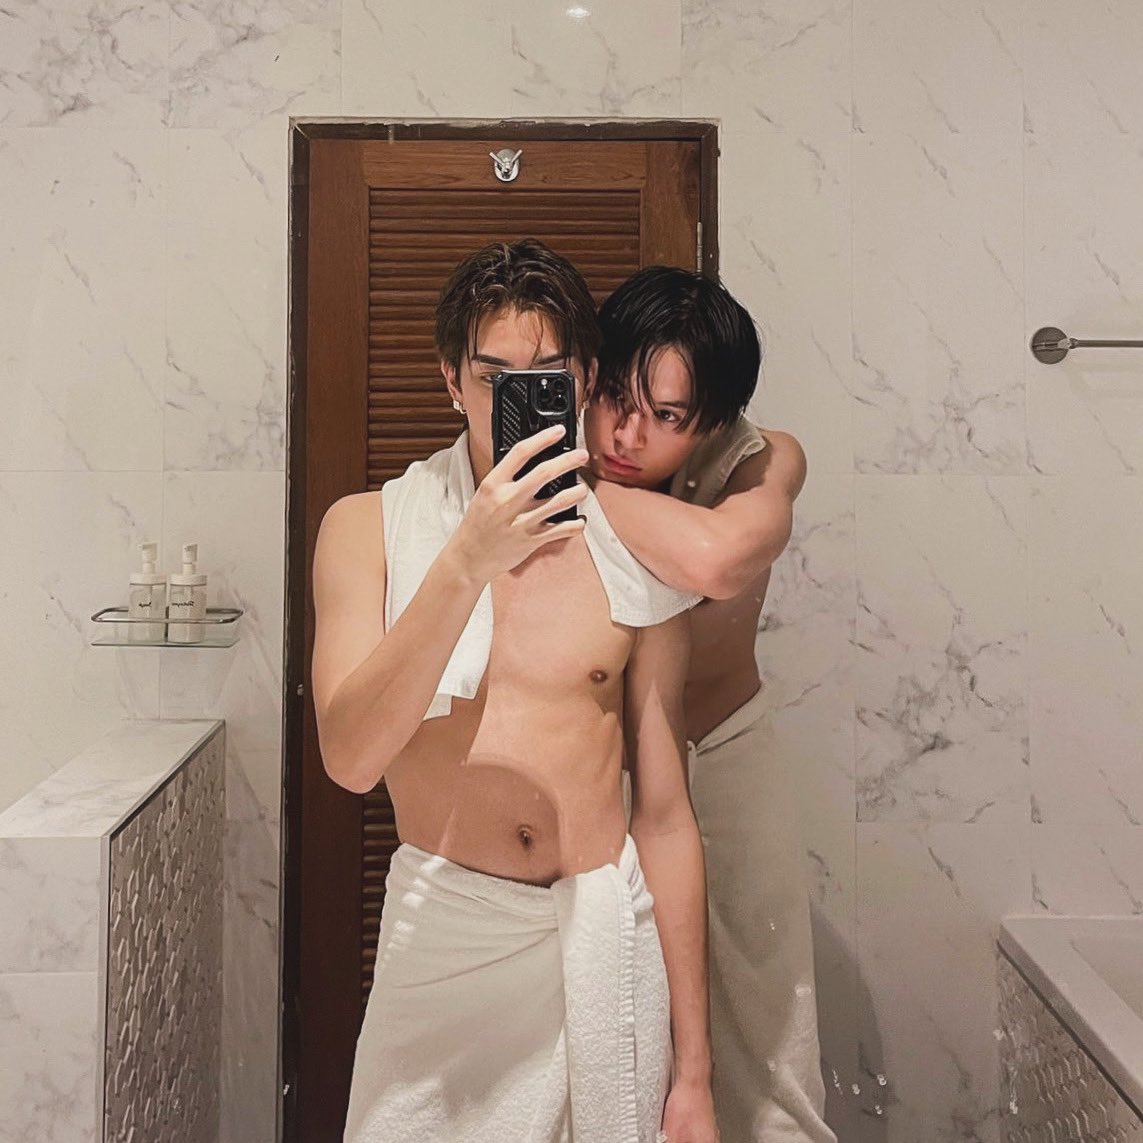 -both in towels
-wet hair
-posting mirror selfie in bathroom
-babe's hair color changed

don't blame me if my mind go wild tonight🤚
[#BillyBabe #bbil1ypn #babiibabe]